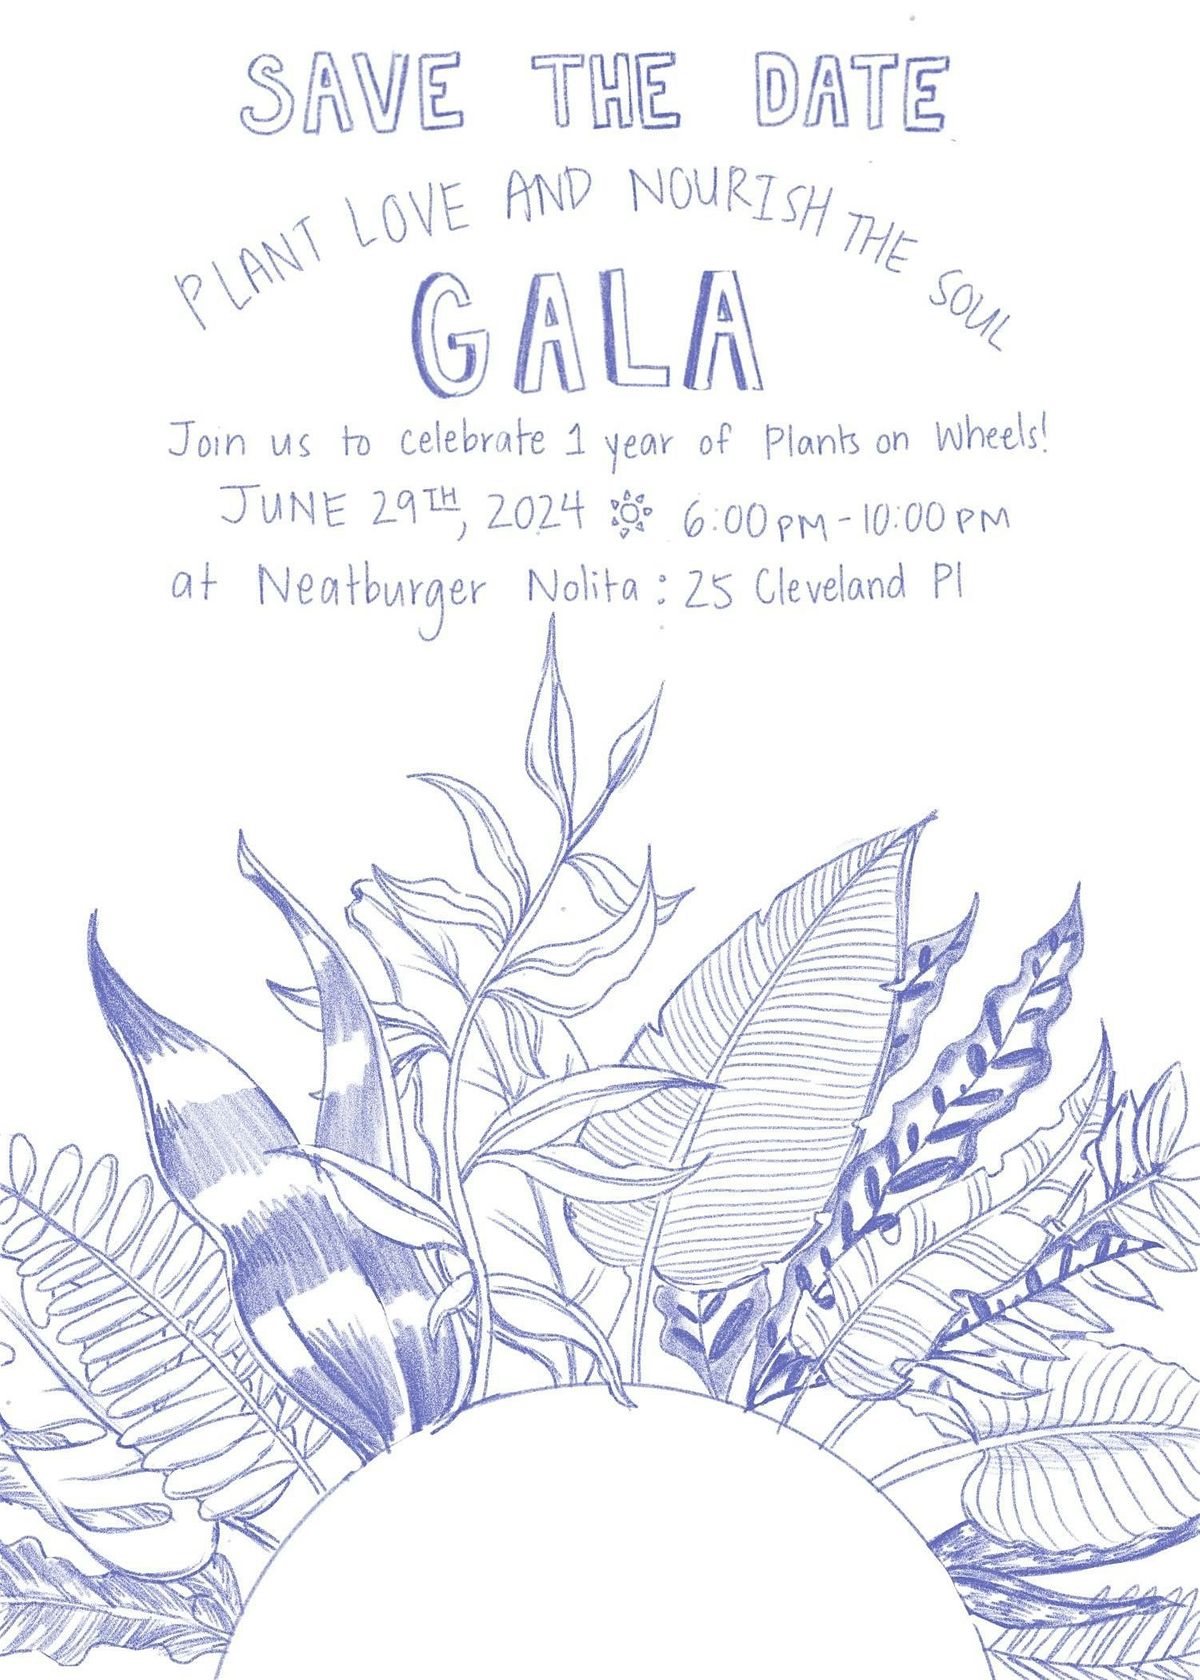 Plant Love And Nourish The Soul Gala